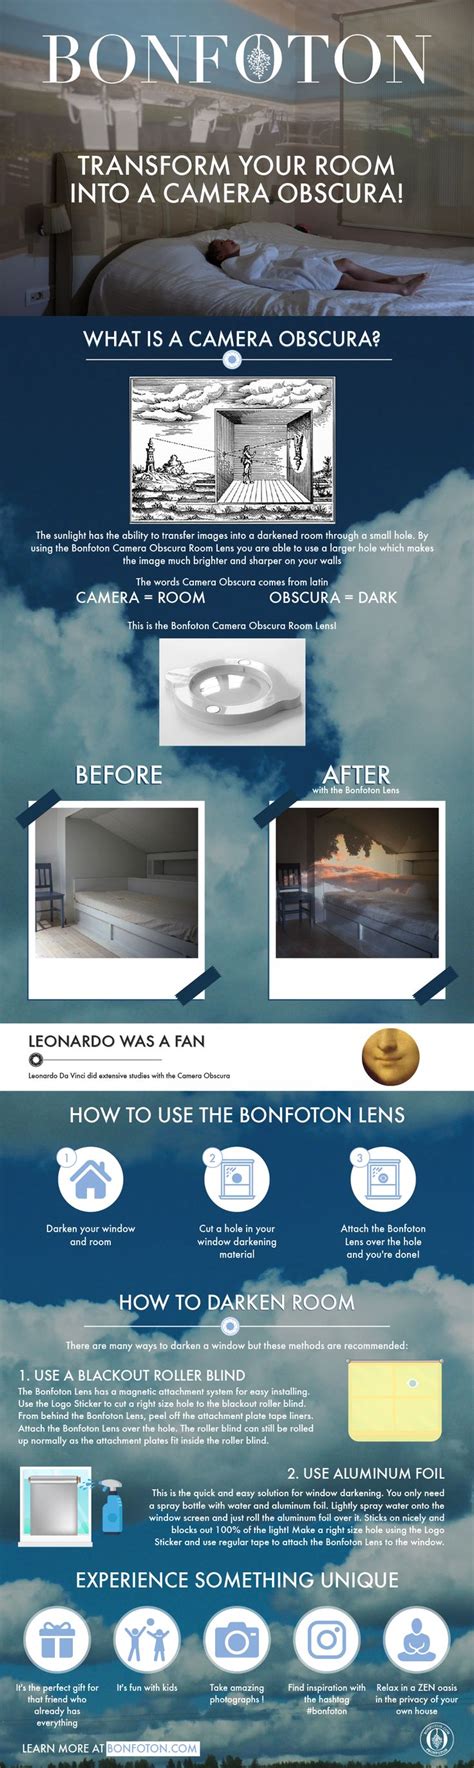 Heres A Simple Infographic That Helps To Understand What Camera Obscura Is And How The Bonfoton